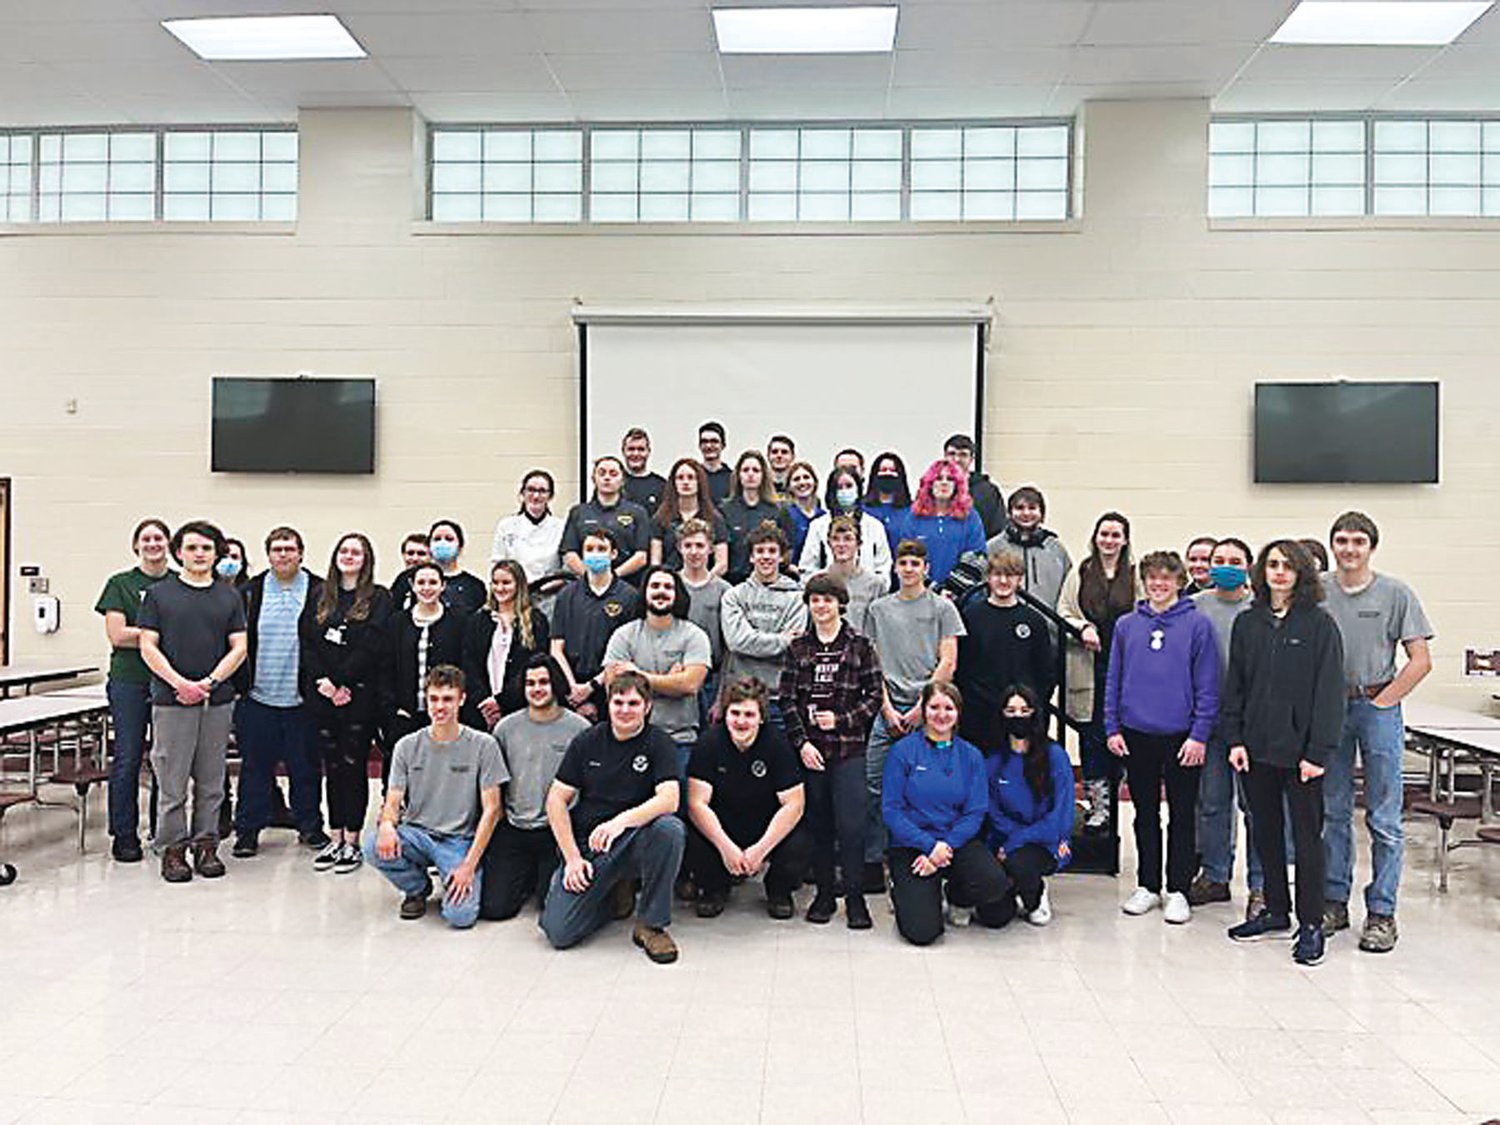 Upper Bucks County Technical School students competed in over 30 technical and leadership competitions at the Pennsylvania SkillsUSA District 11 Championships.